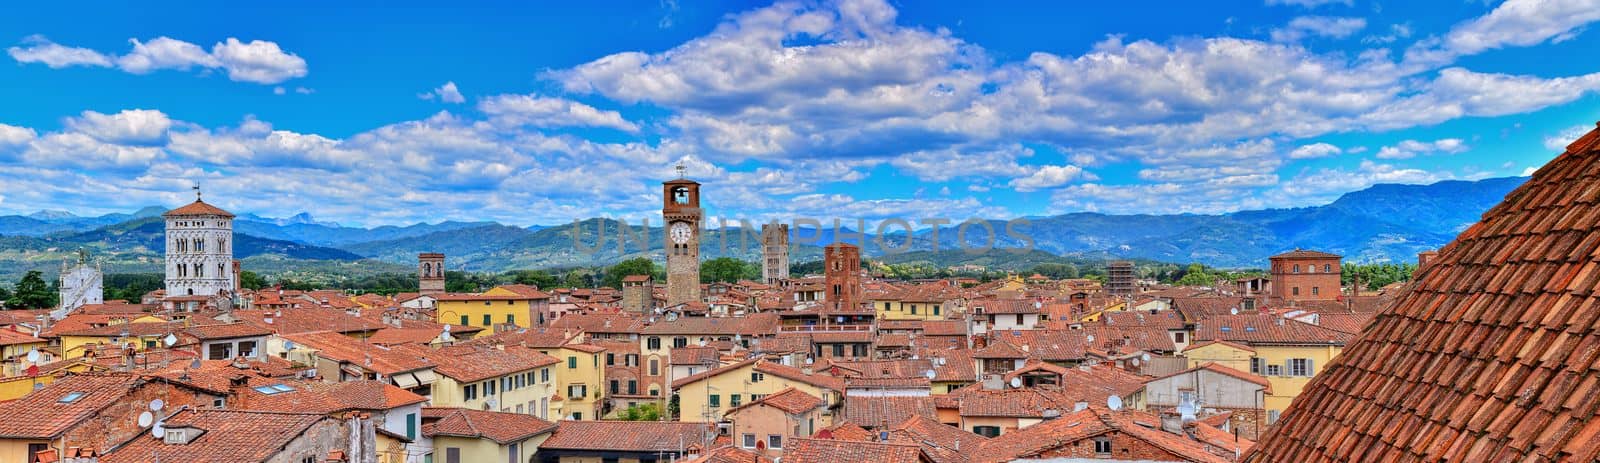 Medieval town Lucca in Tuscany, Italy. by CreativePhotoSpain